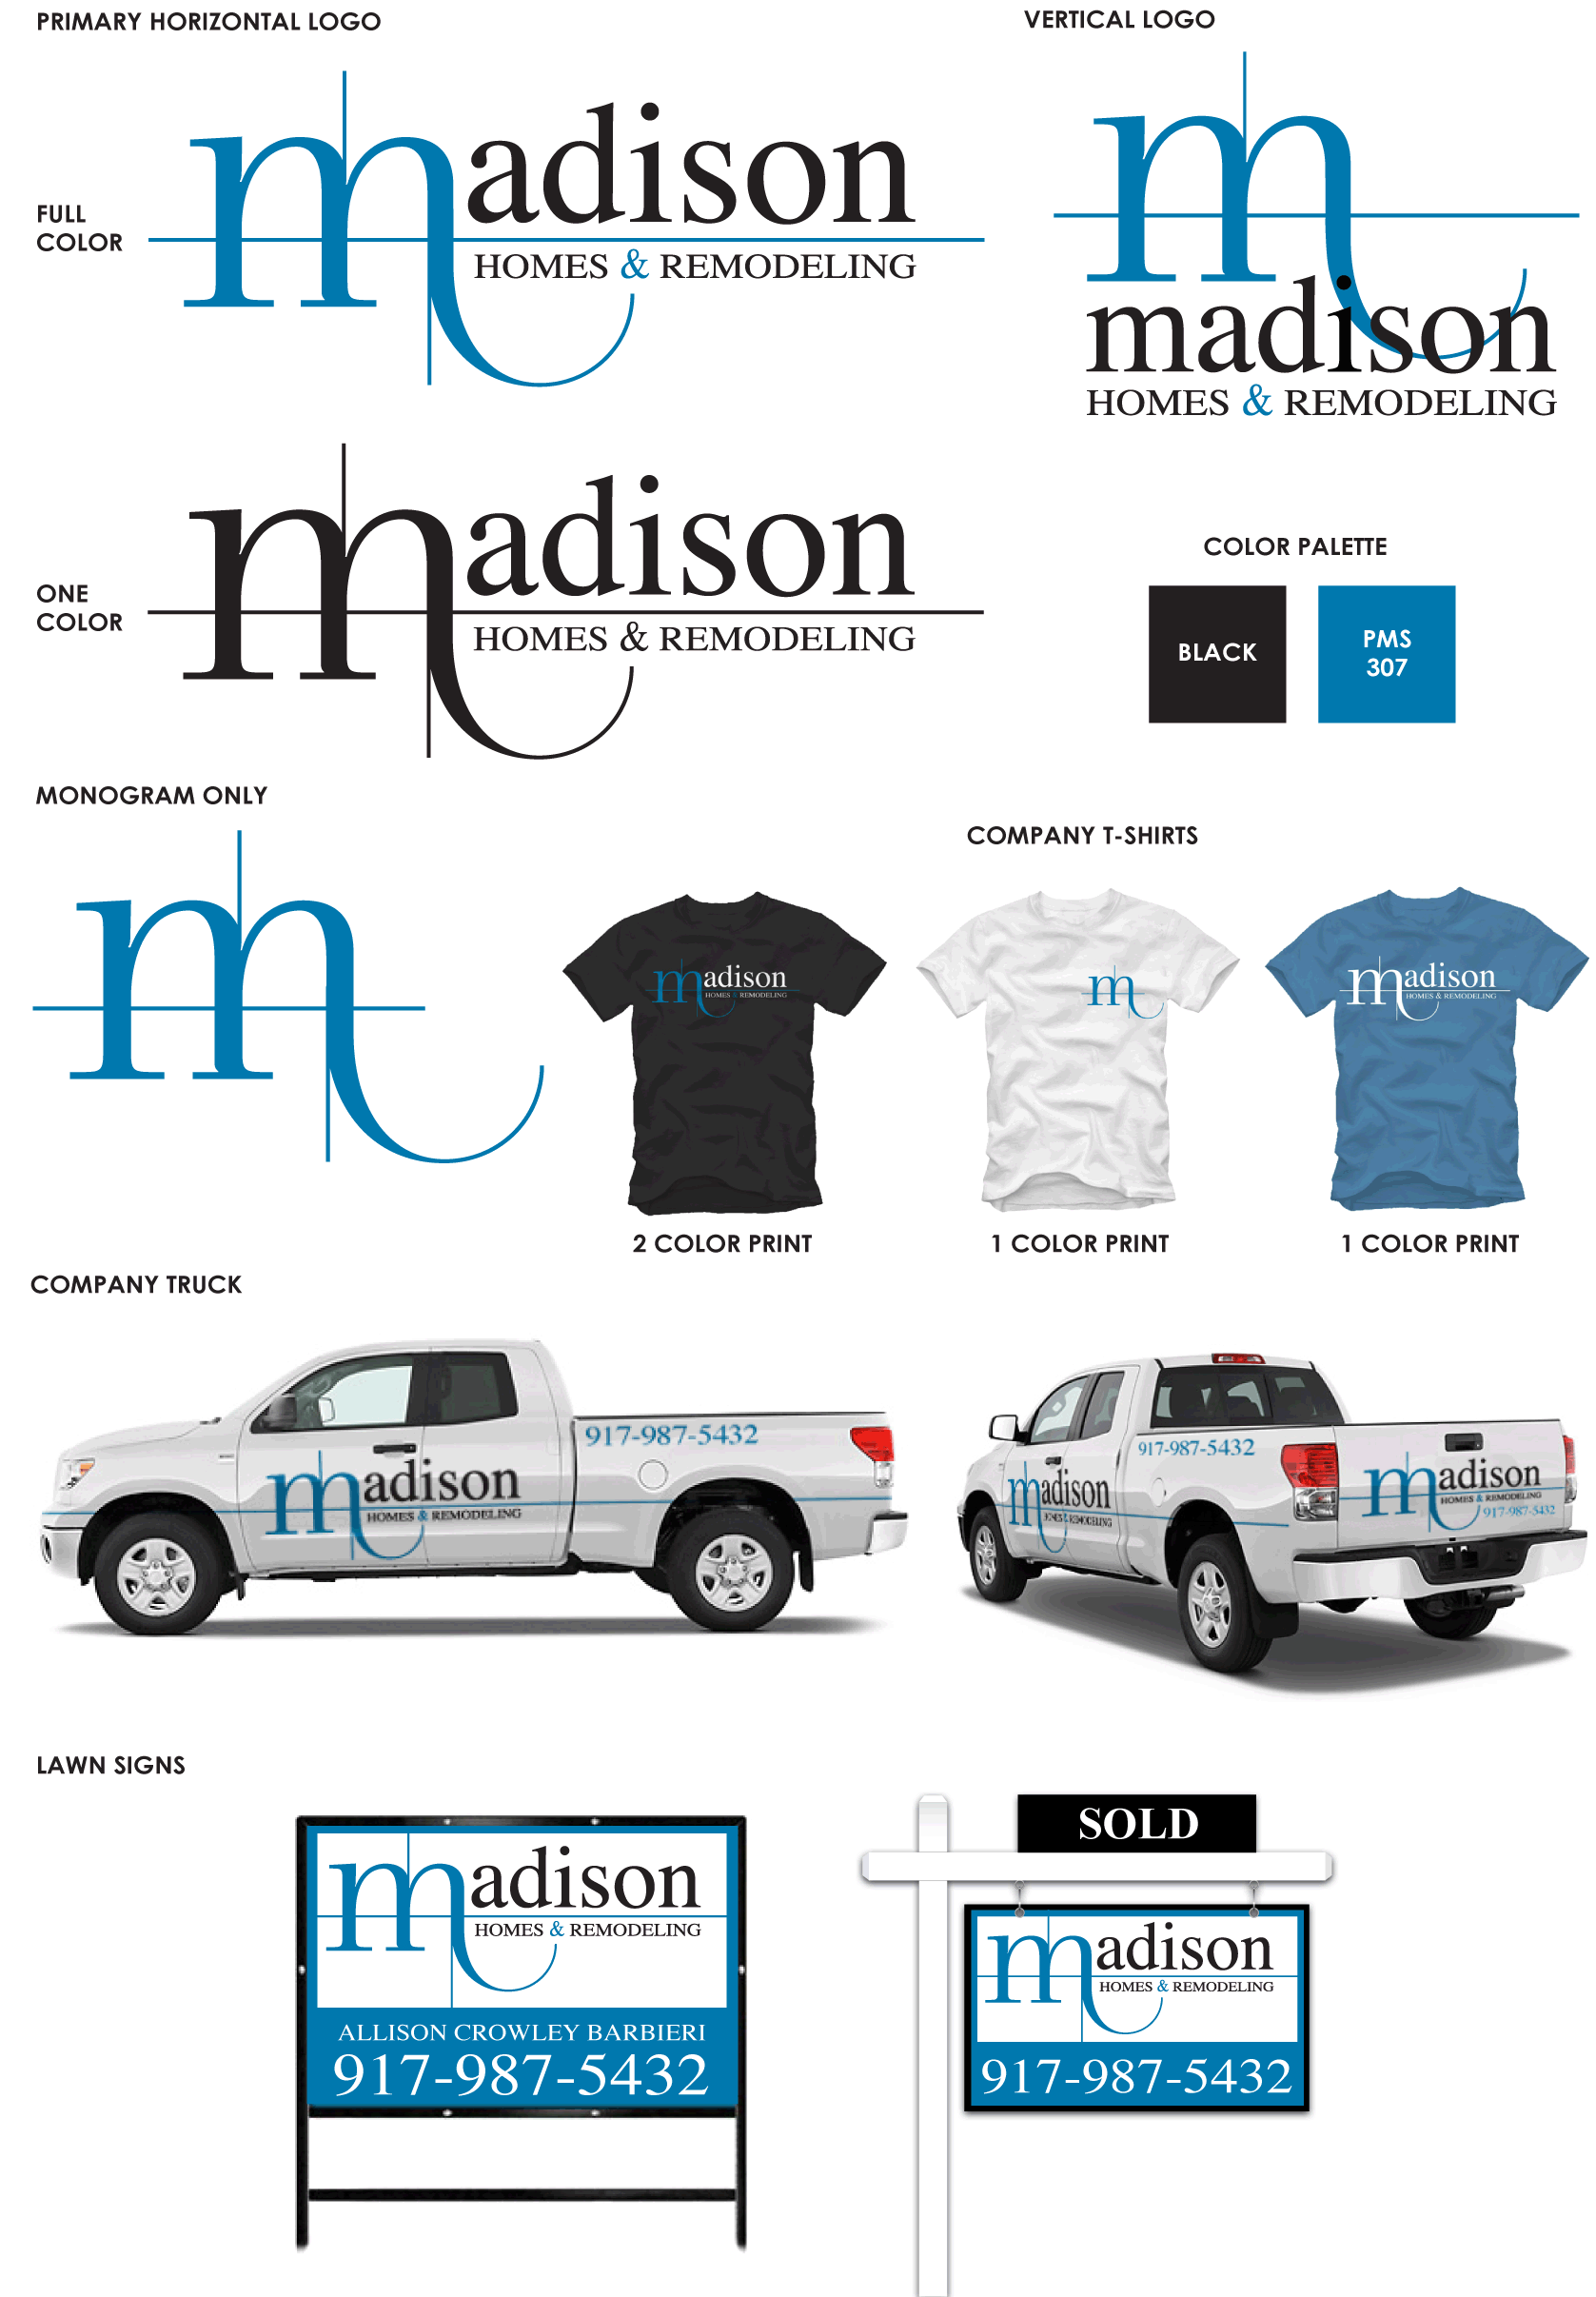 Madison Homes & Remodeling Corporate Branding